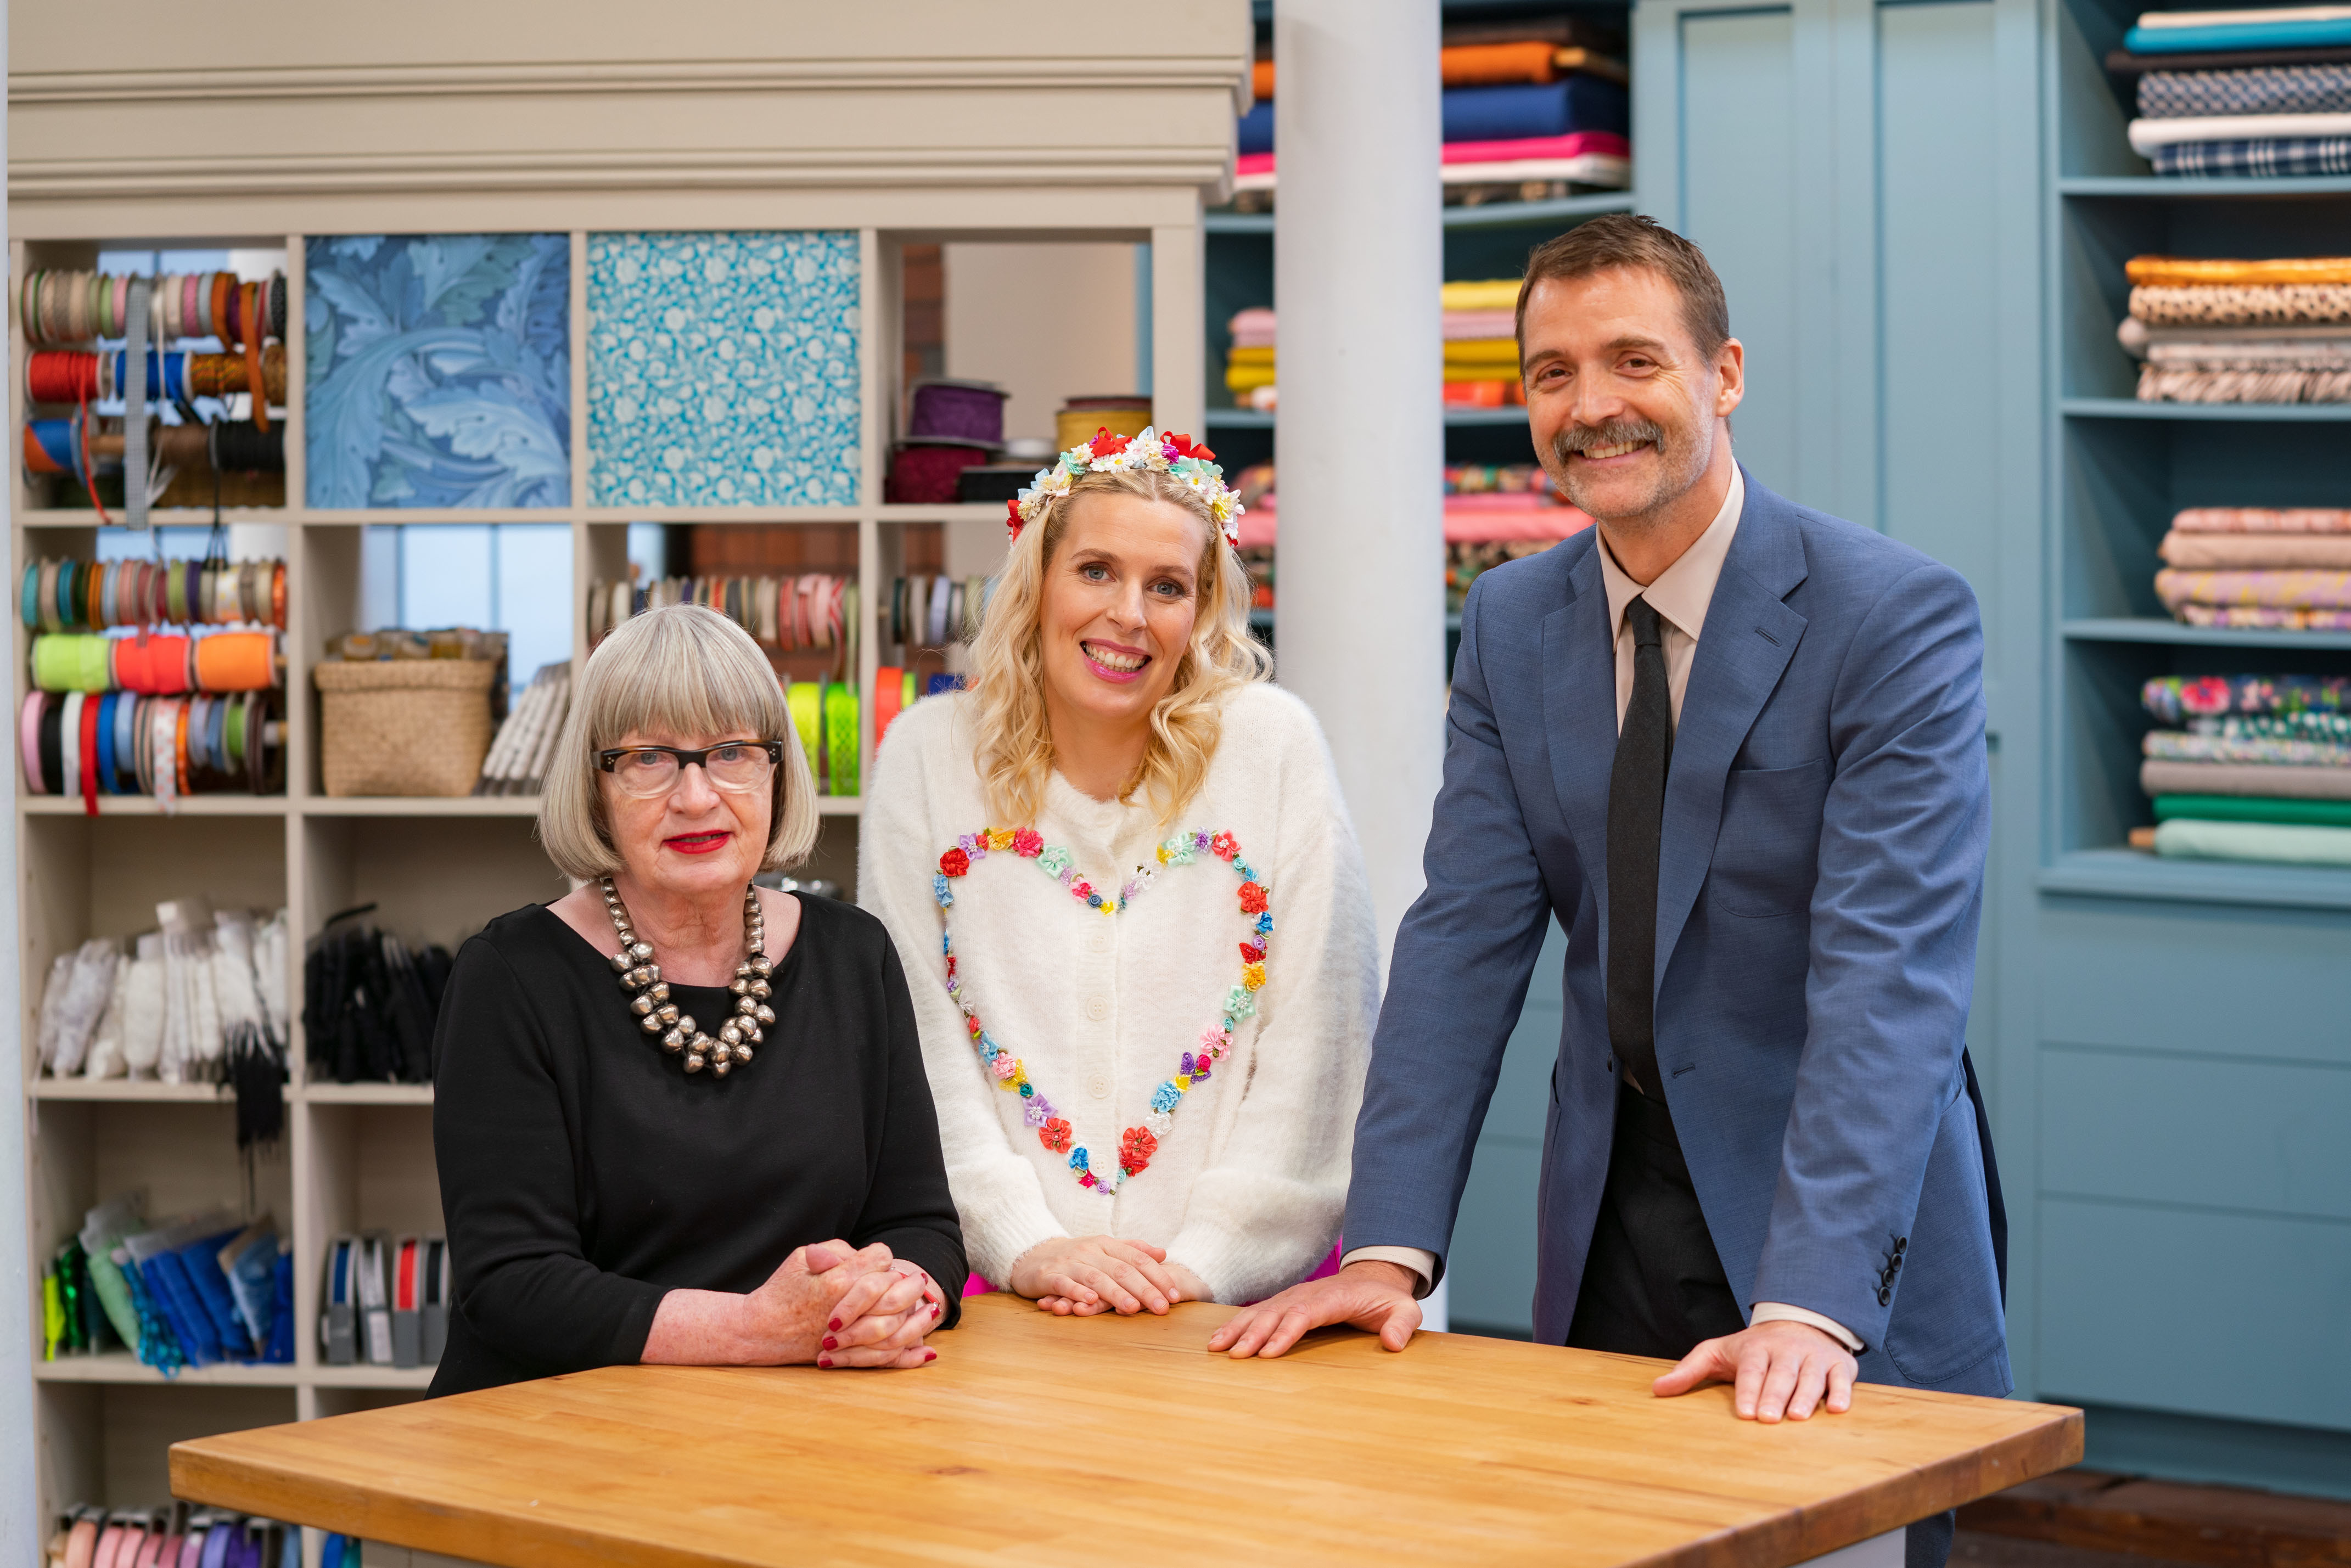 The Great British Sewing Bee 2022: next episode, tasks | What to Watch